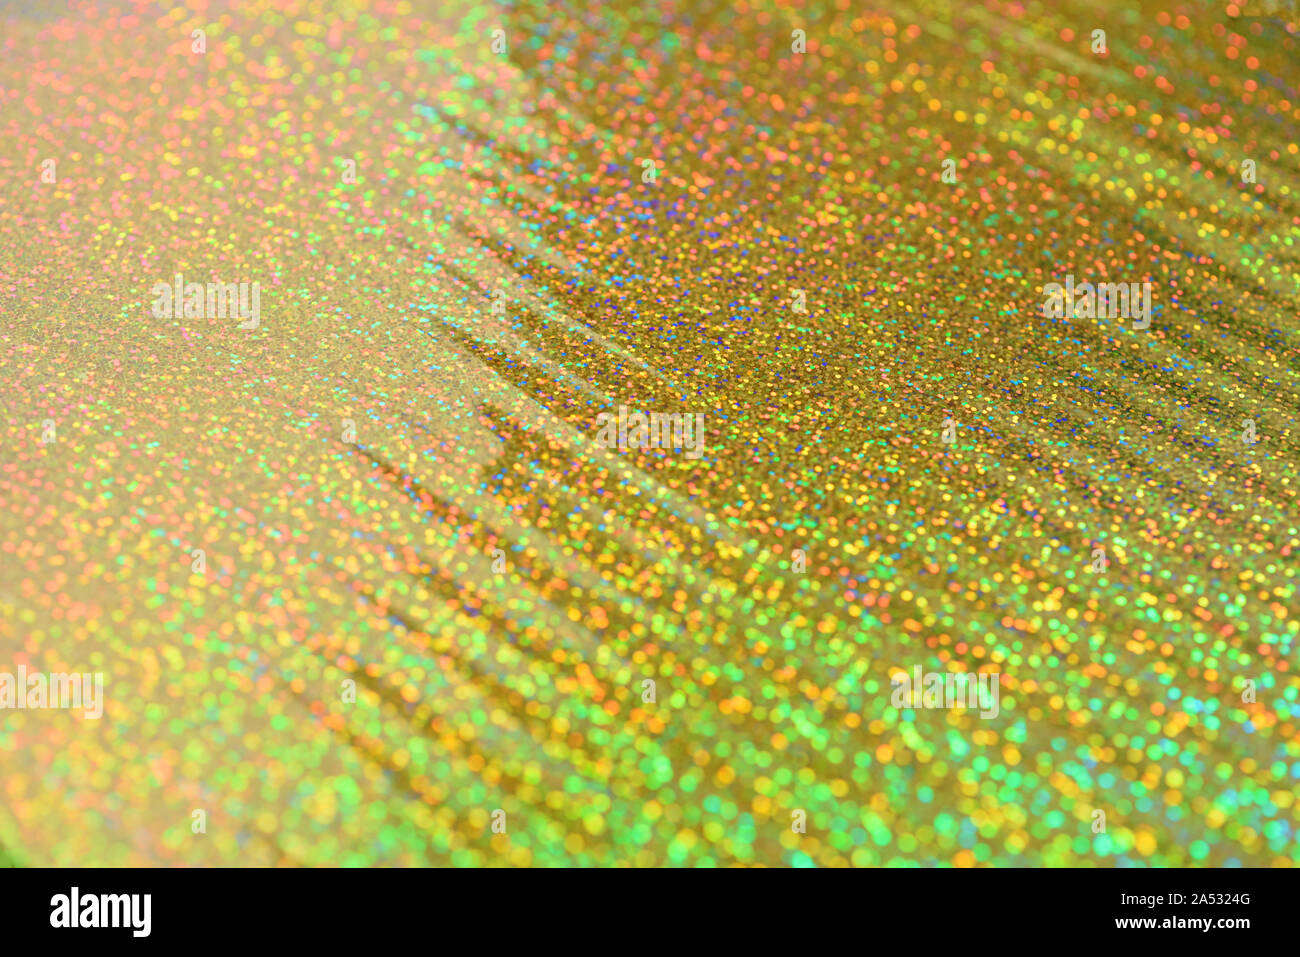 Holographic background. Foil with a holographic covering Stock Photo